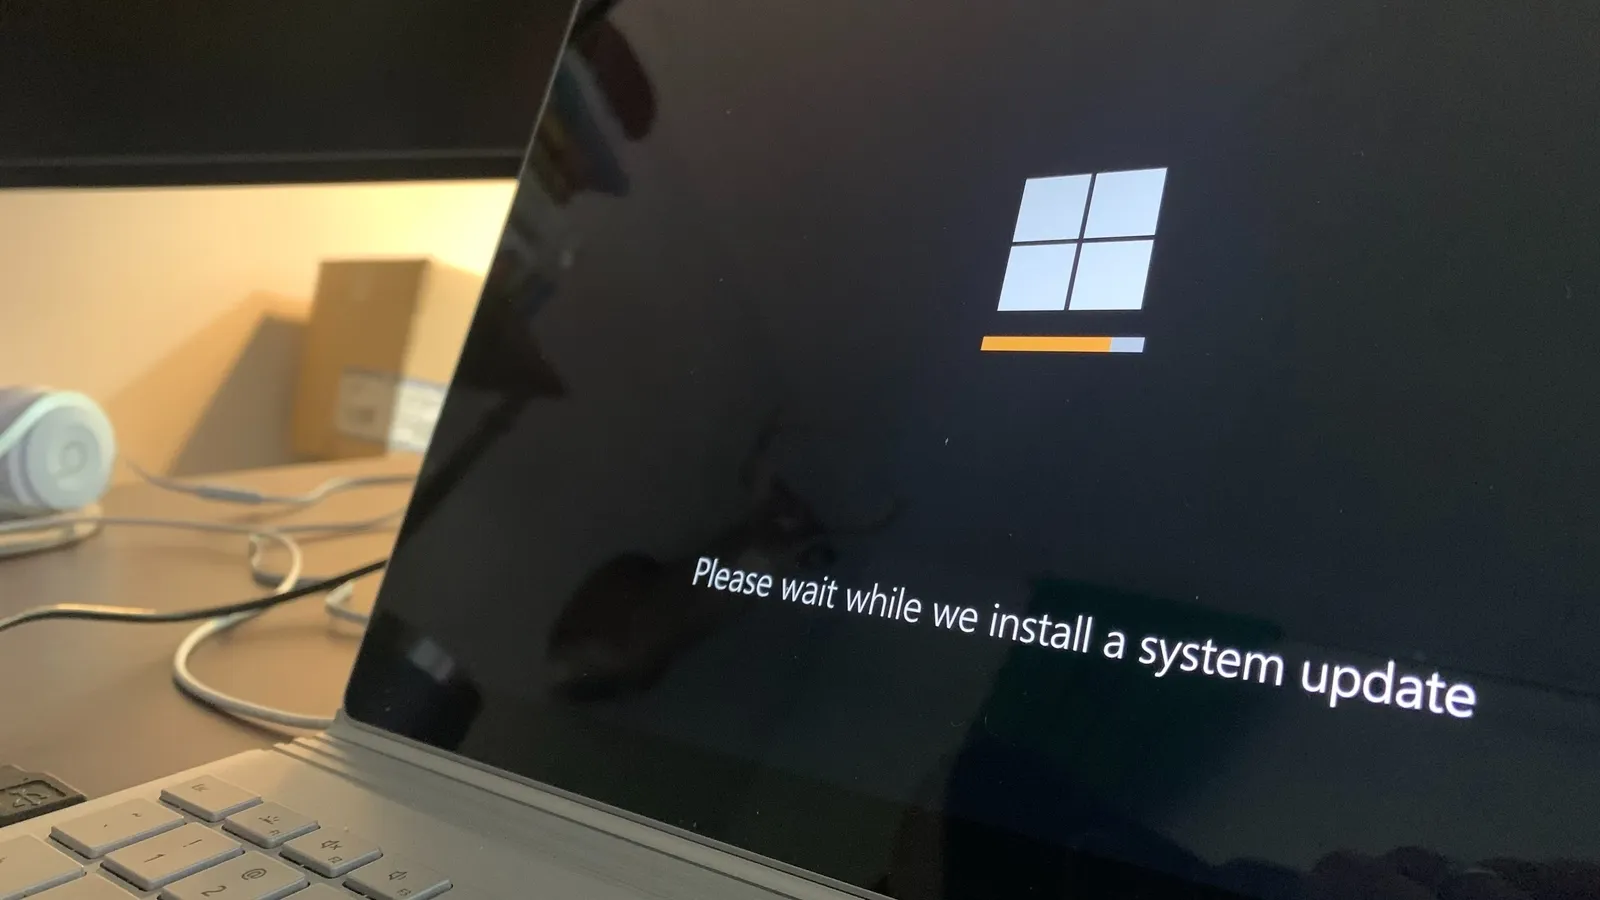 Why Your Windows 11 Is Slow: The Real Reasons Behind Windows 11 Sluggishness Exposed!